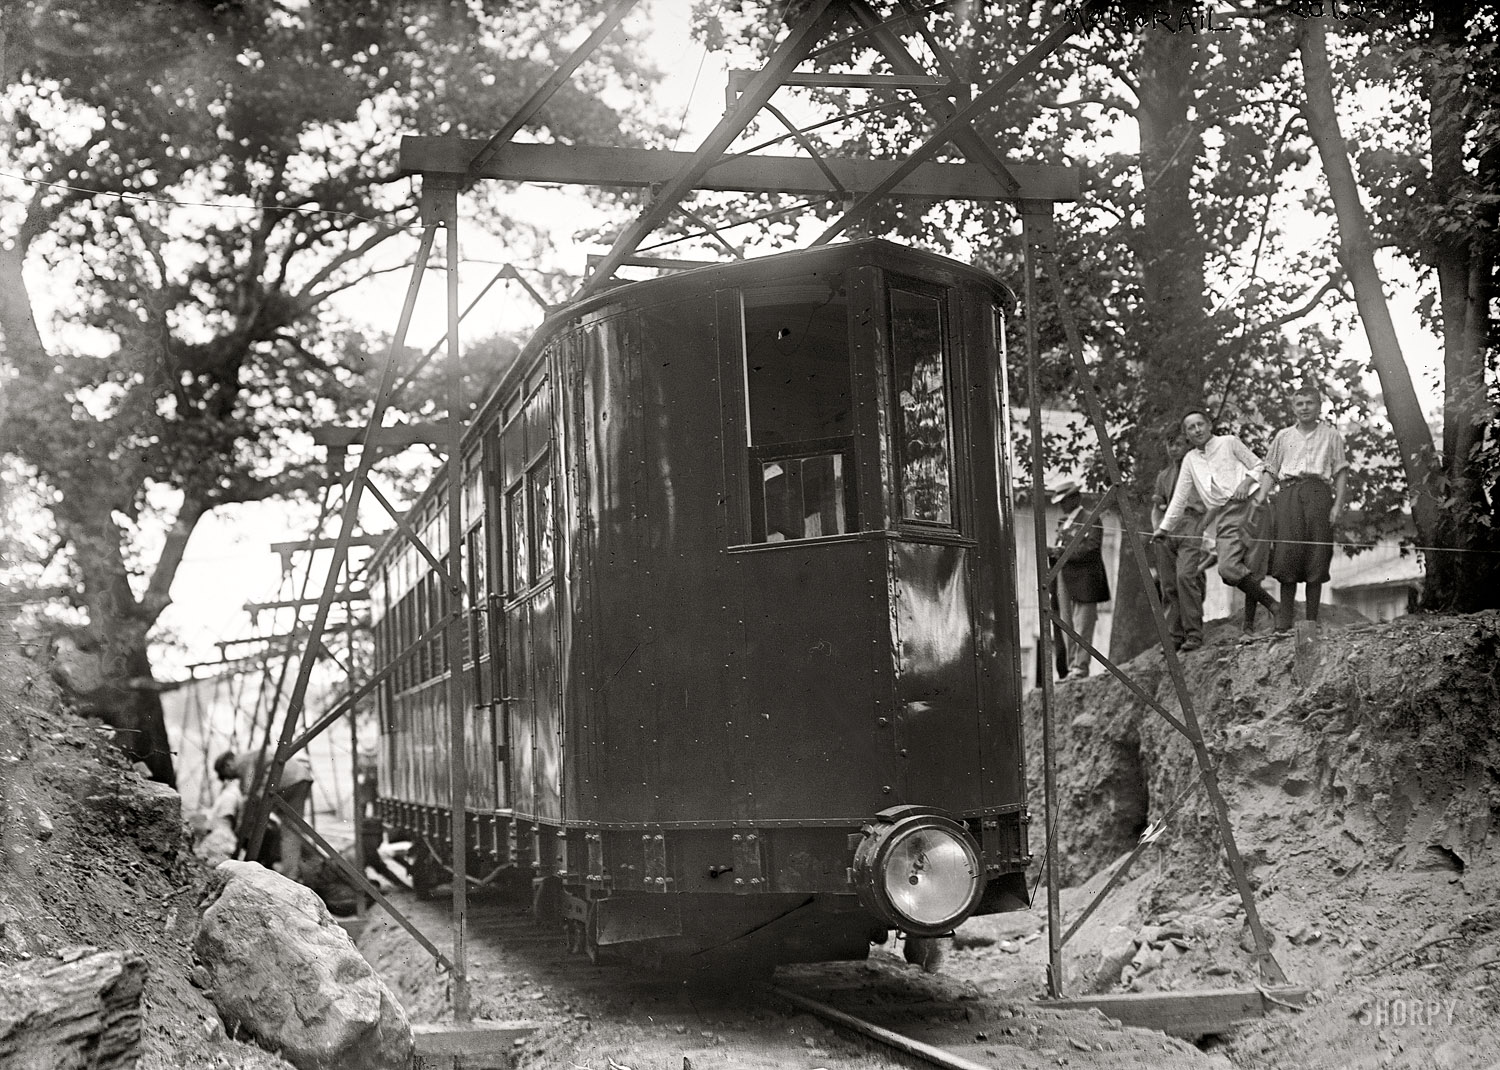 New York circa 1910. "Pelham Park Railroad. City Island monorail." The ill-fated electric monorail, whose sole car ("The Flying Lady") wrecked on its first run in 1910, lasted until 1914. George Grantham Bain Collection. View full size.